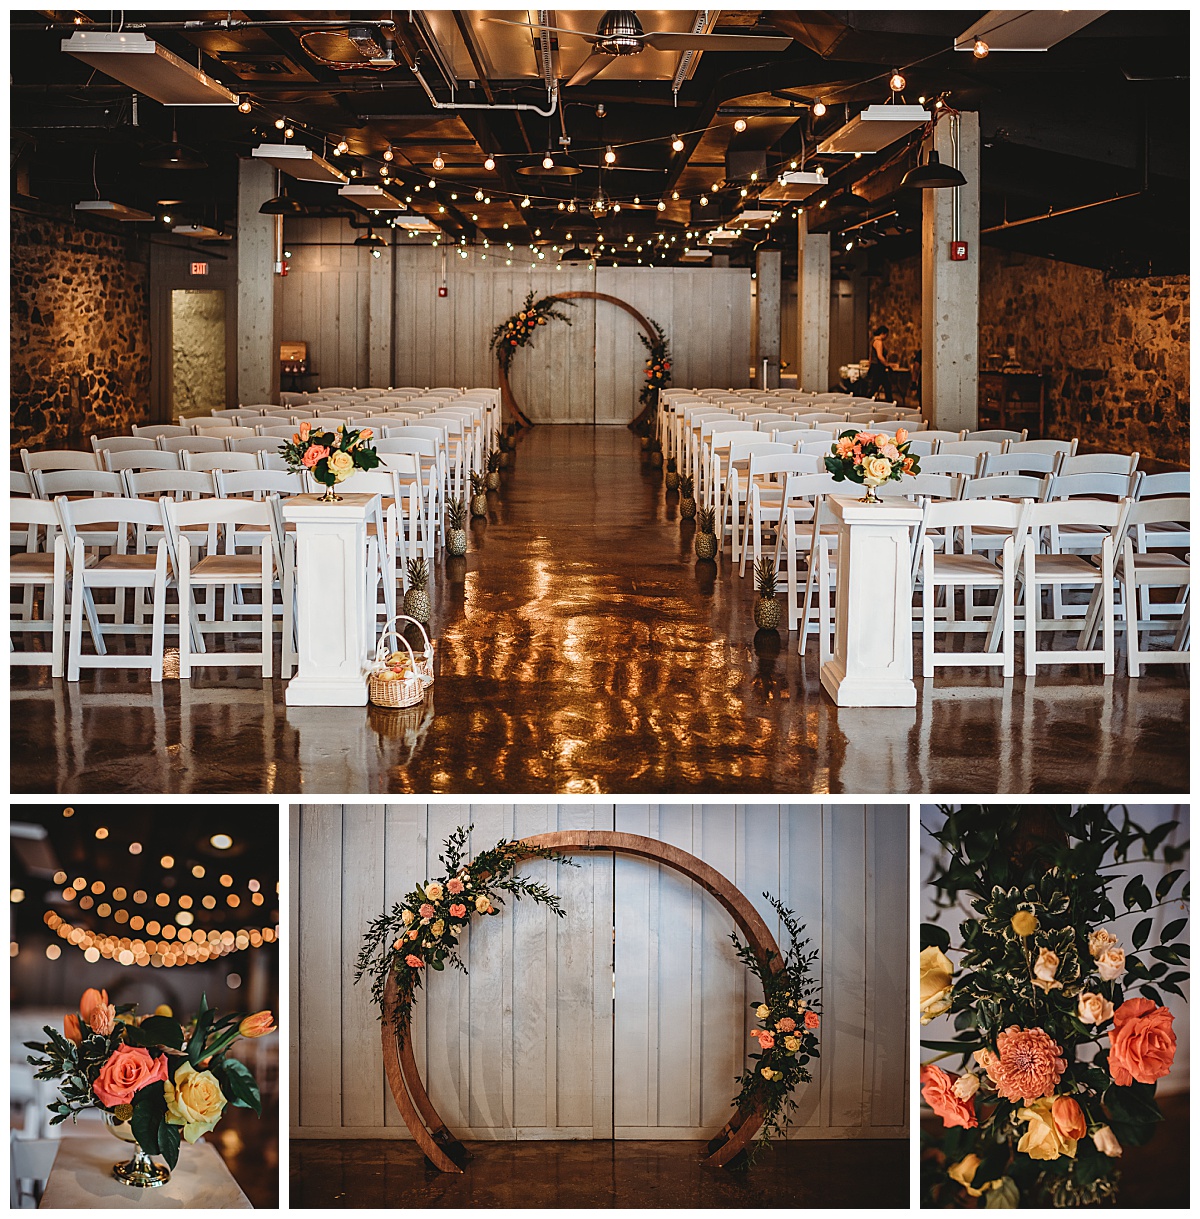 Wedding ceremony decor that's colorful and industrial for a summer wedding at Mainstreet Ballroom captured by Brittany Dunbar Photography, an Ellicott City Wedding Photographer.